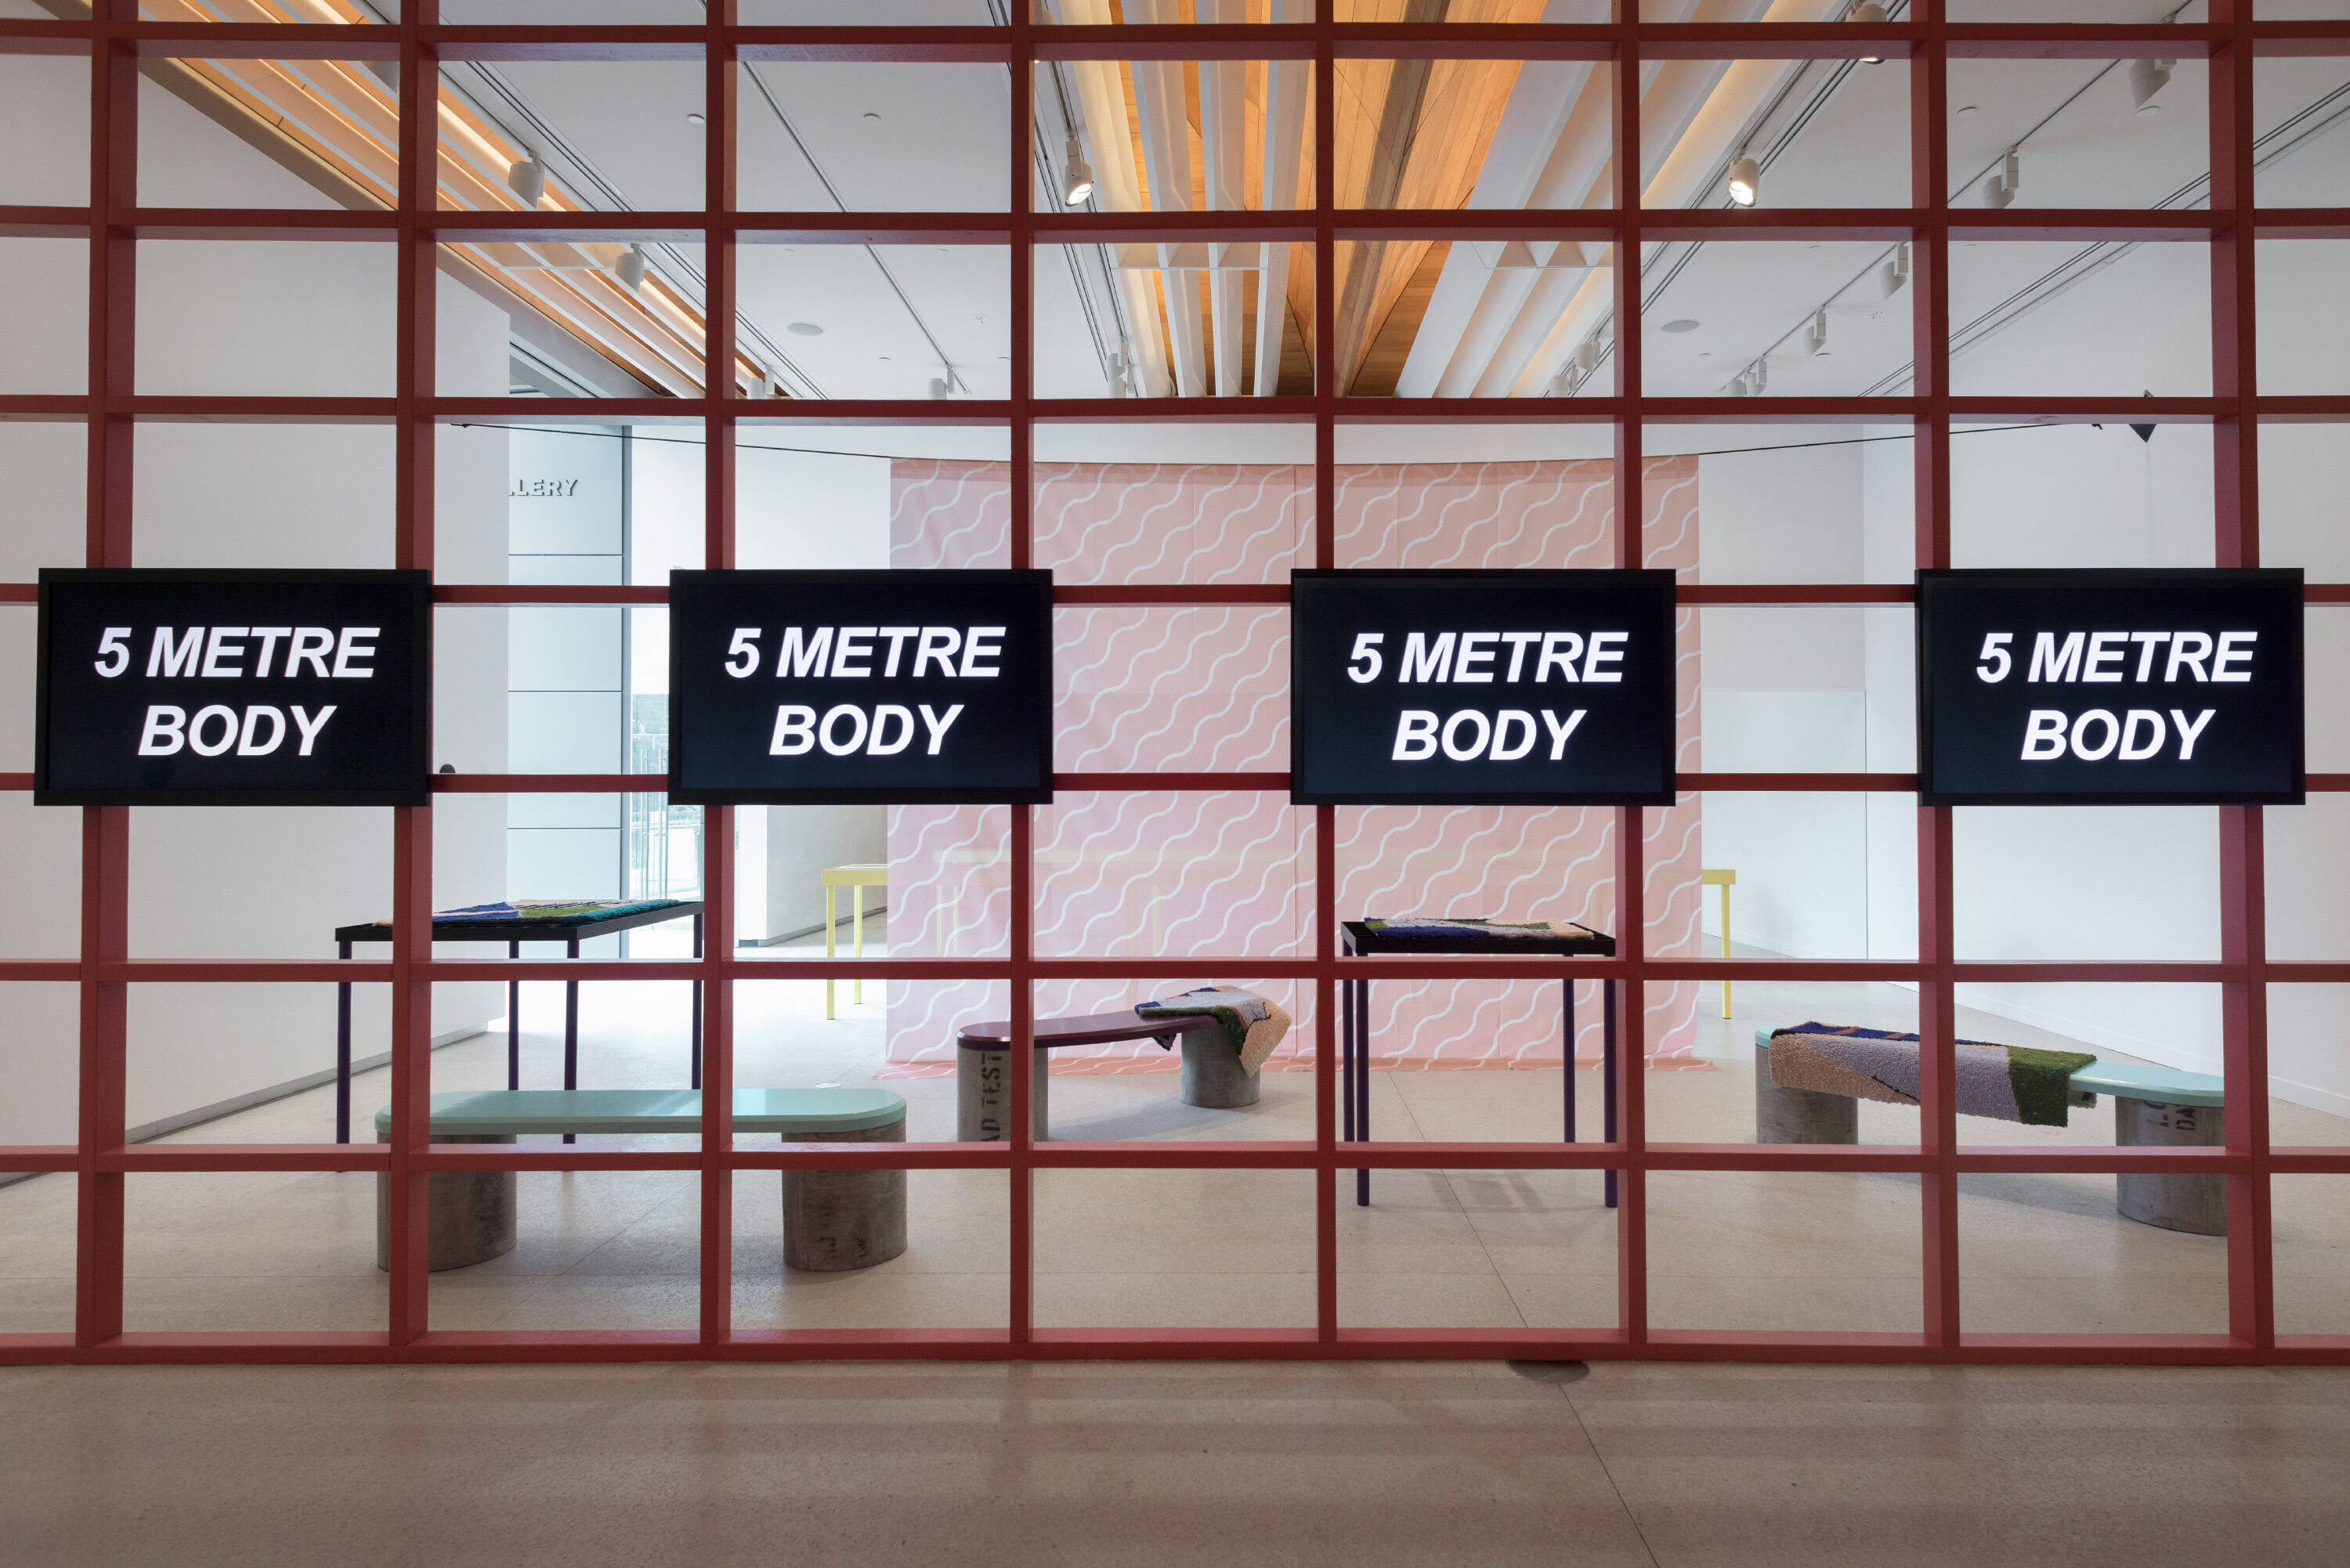 <p><strong>Ruth Buchanan</strong>&nbsp;<em>BAD VISUAL SYSTEMS</em> (installation detail), 2016/2018, winner of the 2018 Walters Prize&nbsp;</p>
